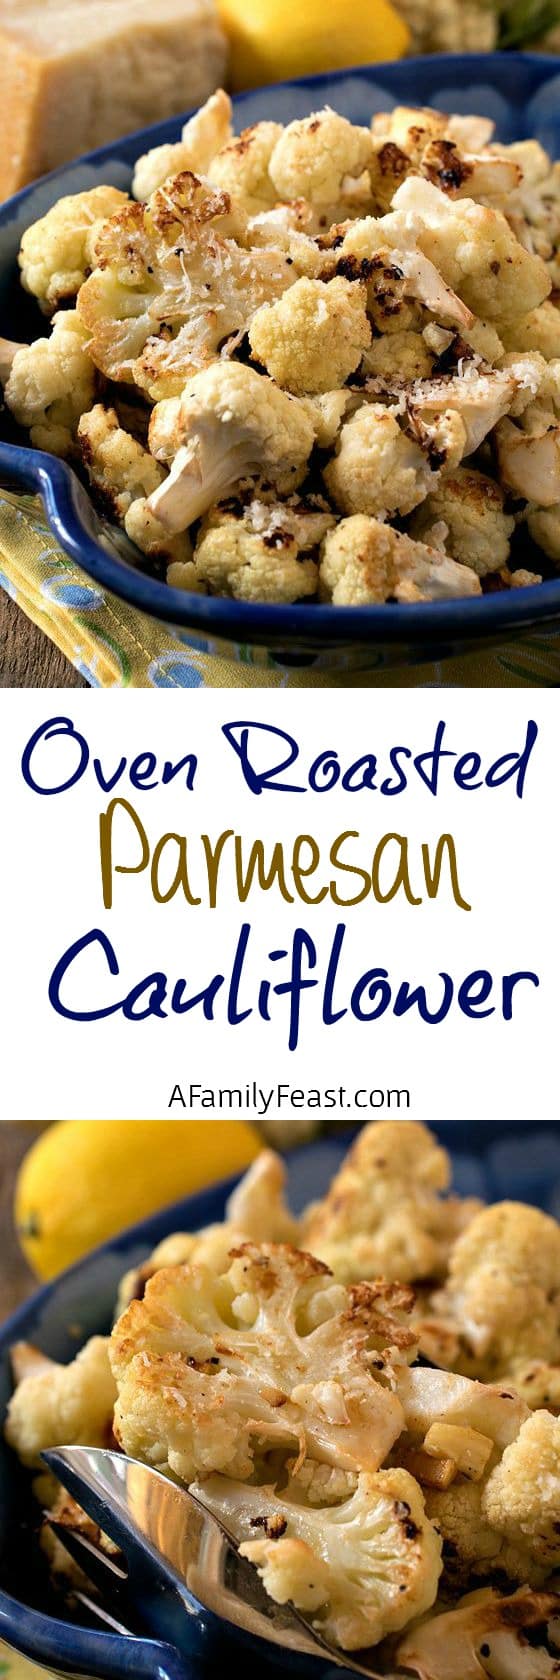 Oven Roasted Parmesan Cauliflower - A simple, delicious side dish perfect for a weeknight meal or special holiday dinner.